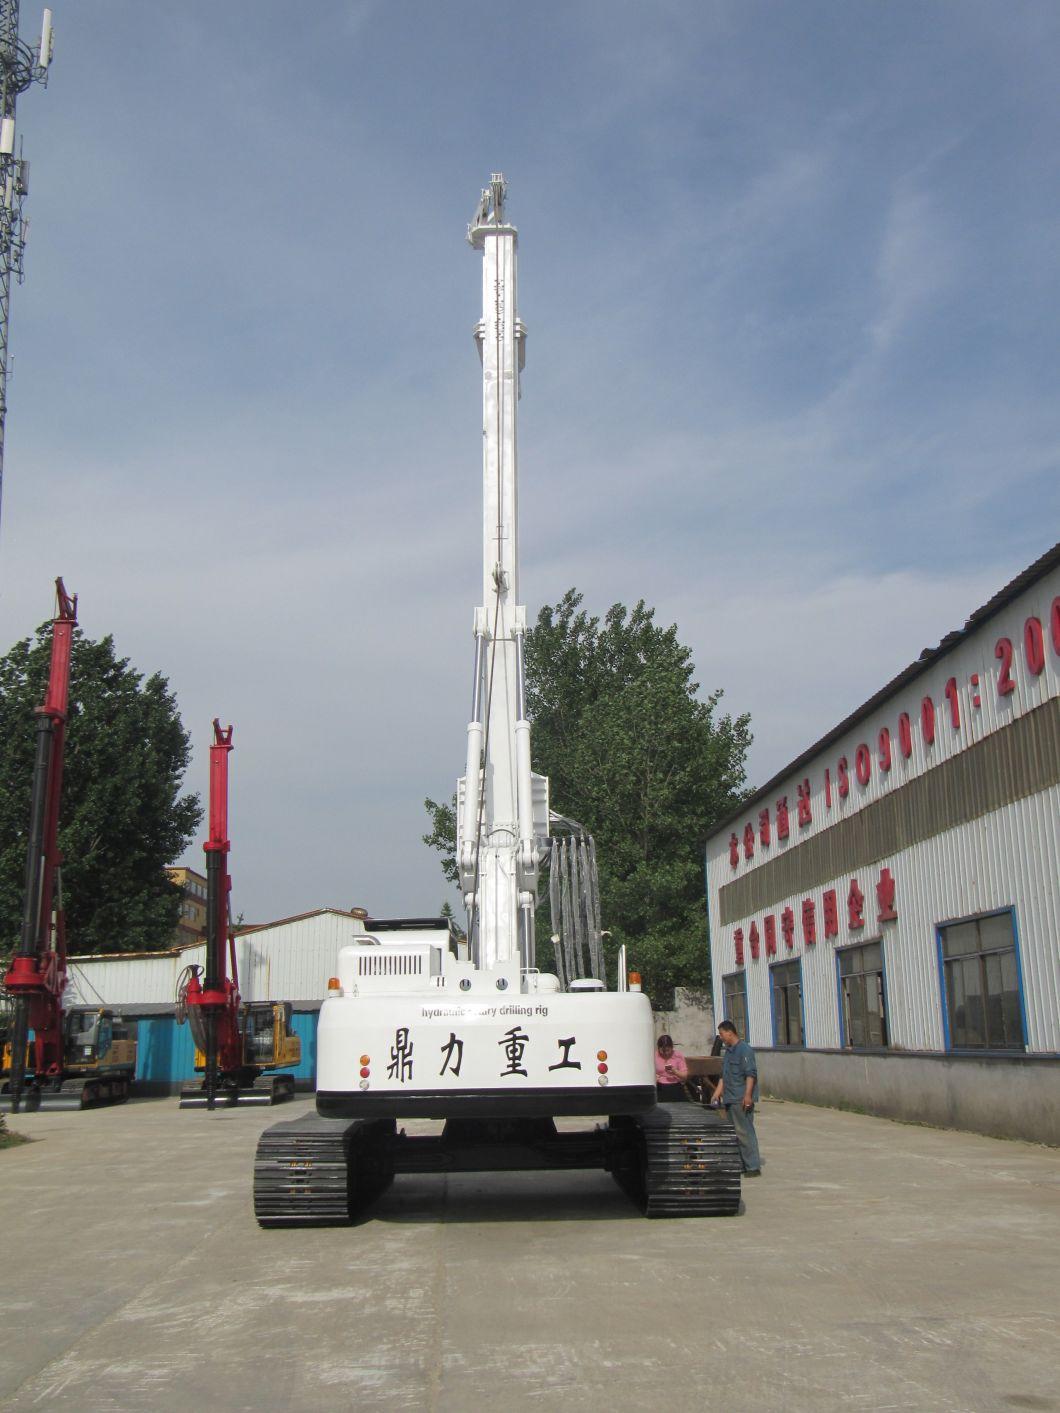 Small Crawler Hydraulic Series Dr-100 Drilling Rig for Pile Foundation/Mining Water Well Drilling Rig/Engineering Construction Equipment